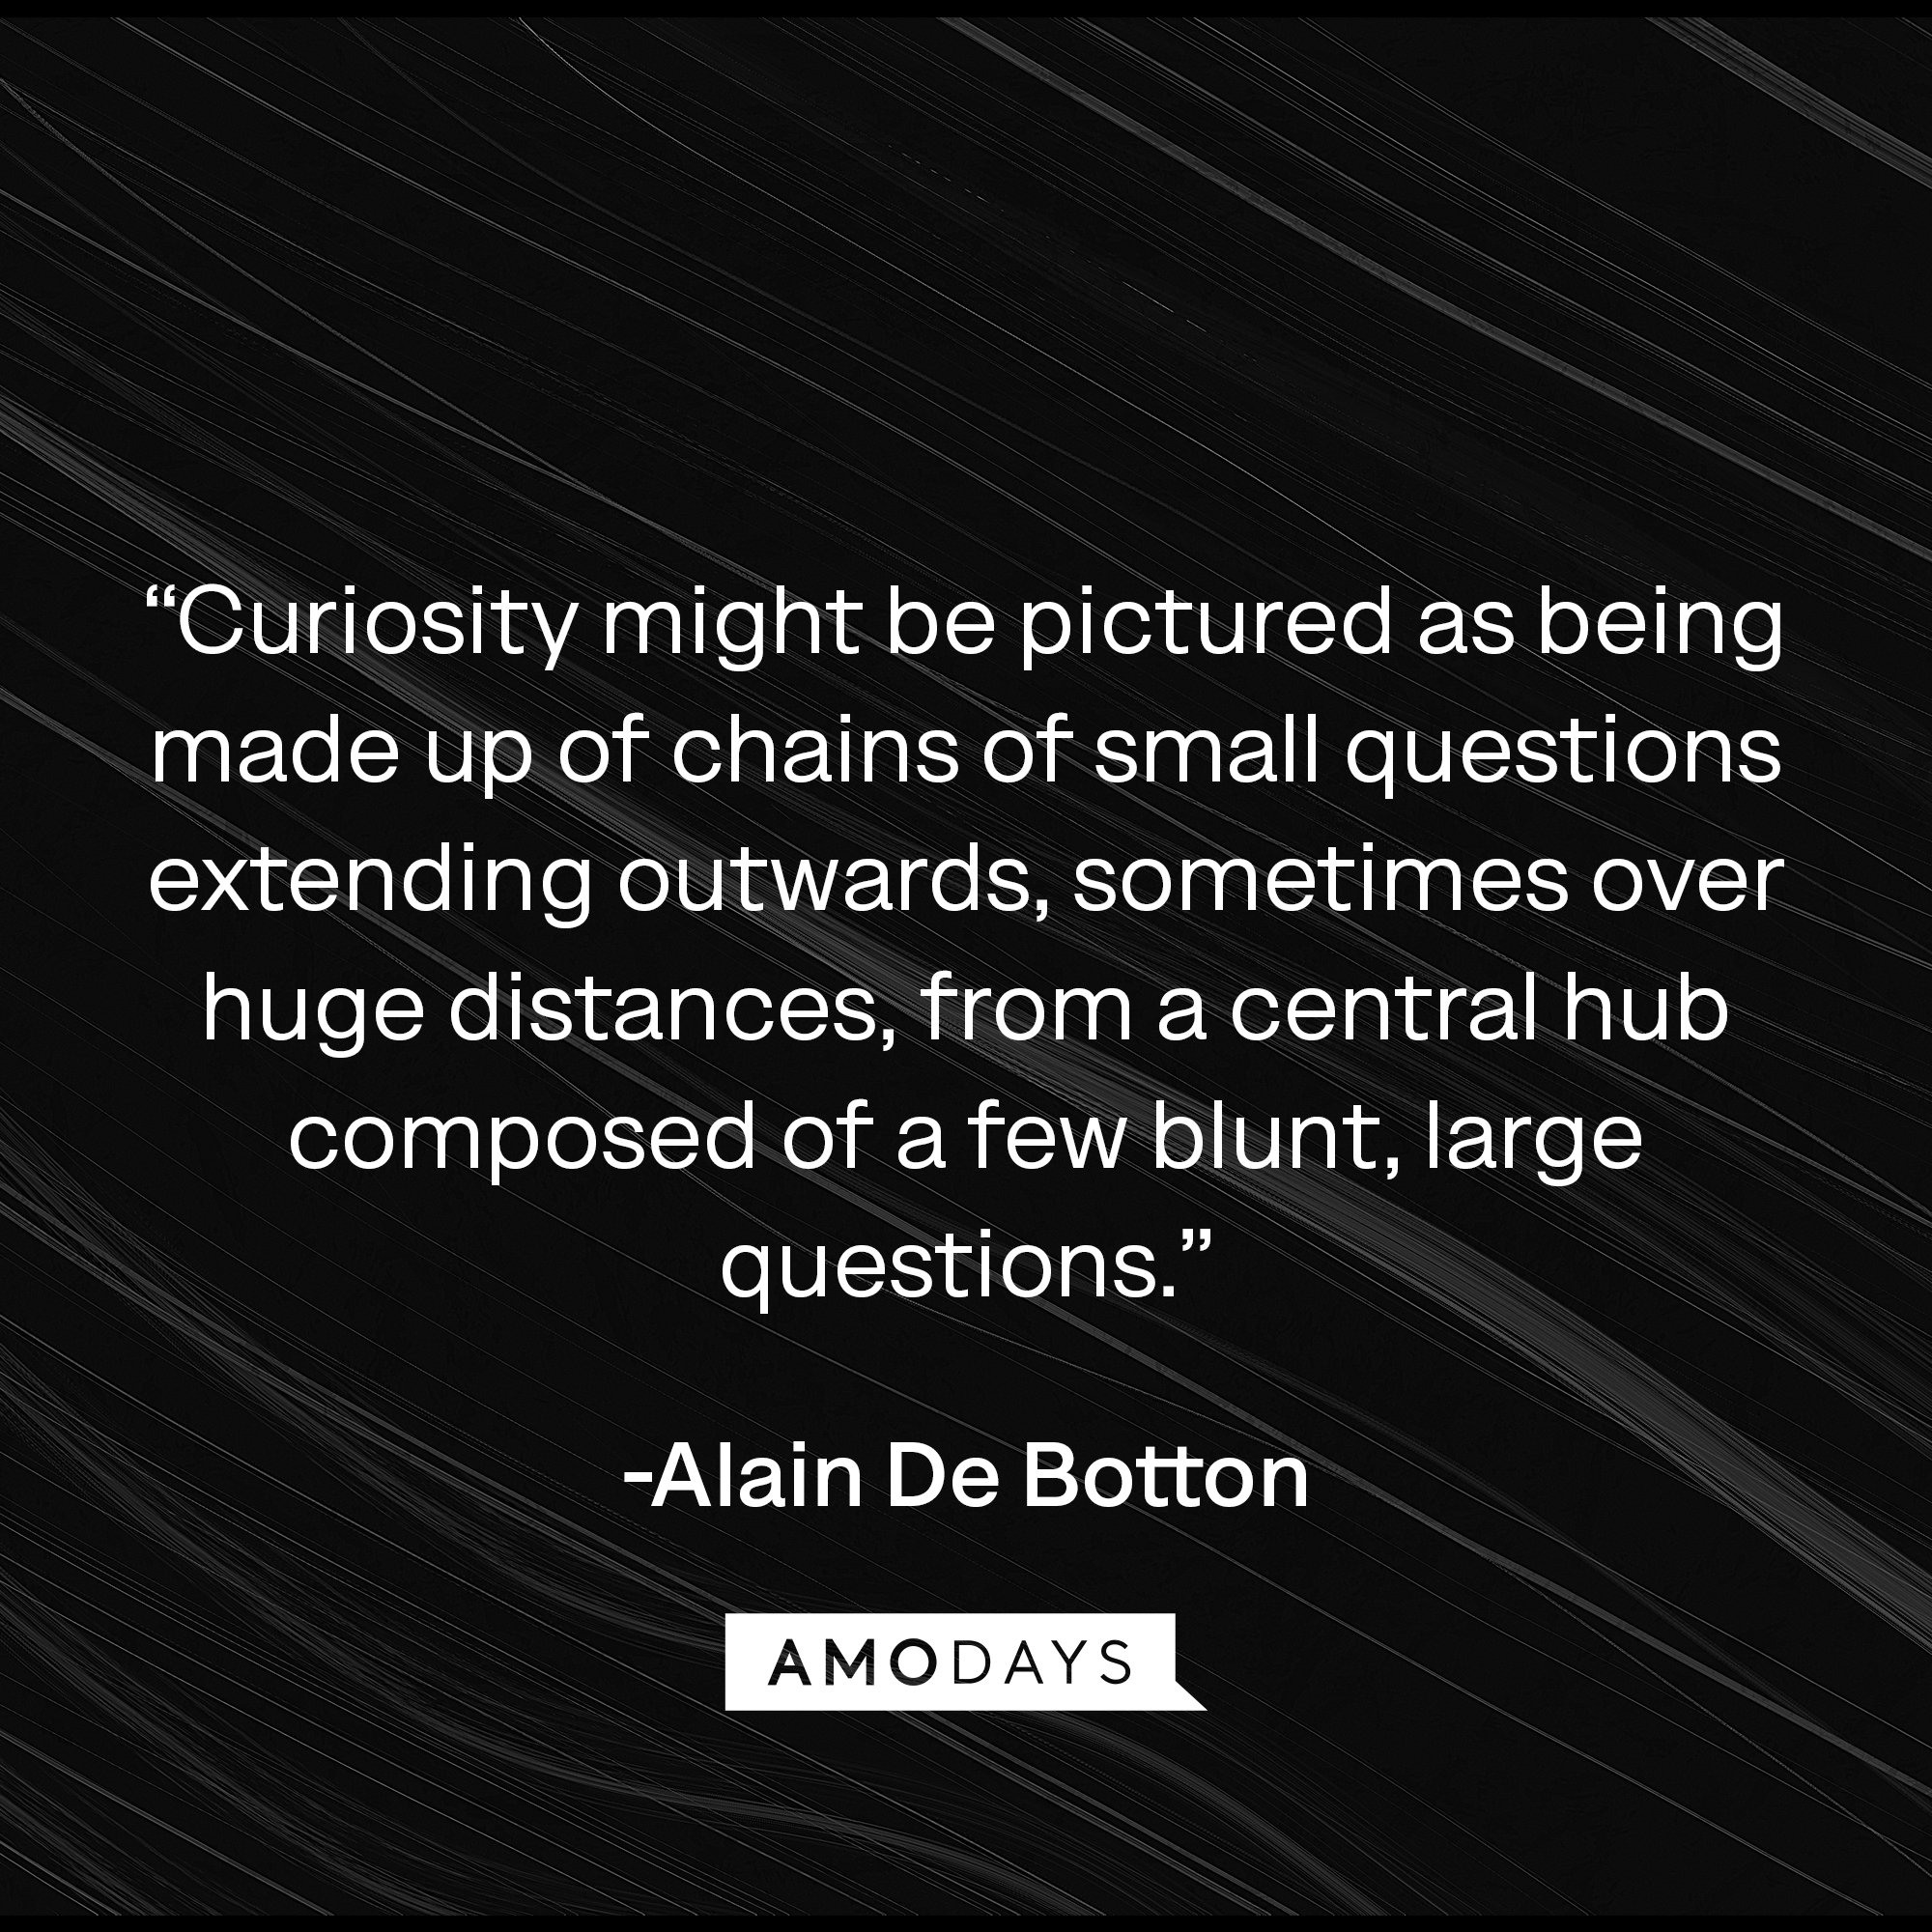  Alain De Botton's quote: “Curiosity might be pictured as being made up of chains of small questions extending outwards, sometimes over huge distances, from a central hub composed of a few blunt, large questions.” | Image: AmoDays